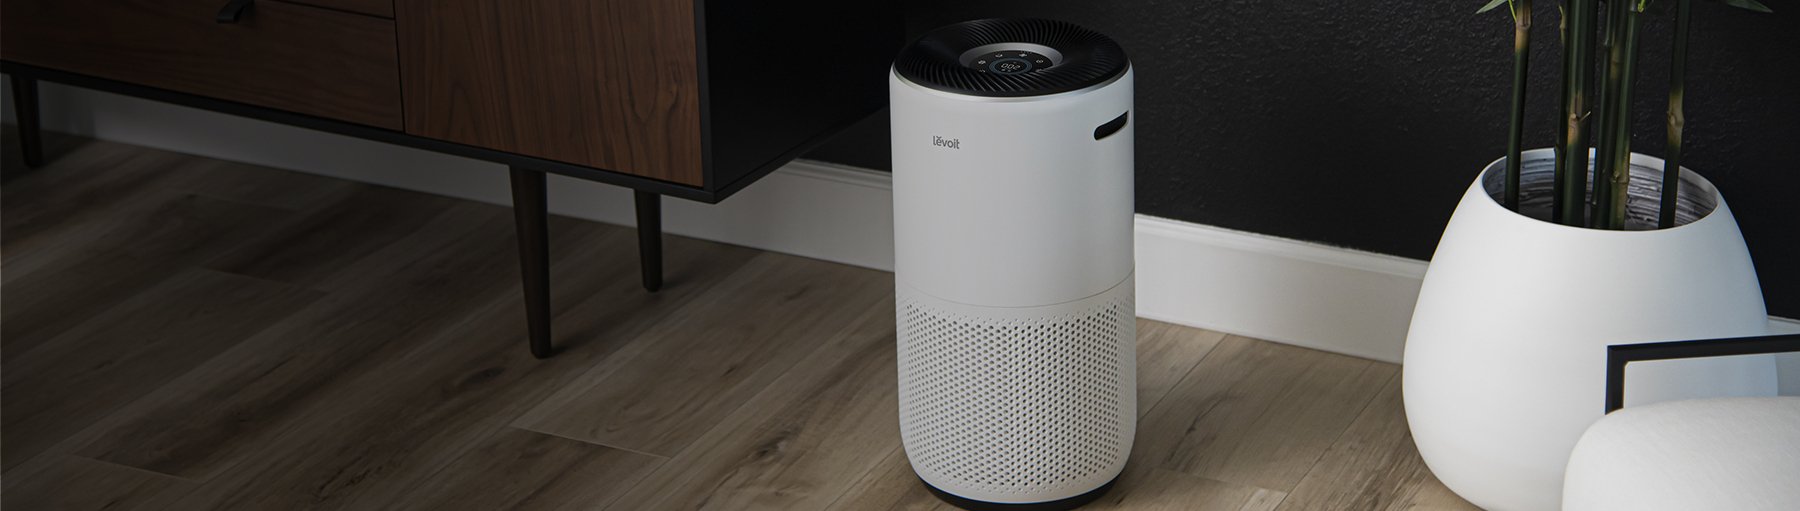 Levoit Core 300s vs Sterra Moon: Which Air Purifier is Worth Your Inve